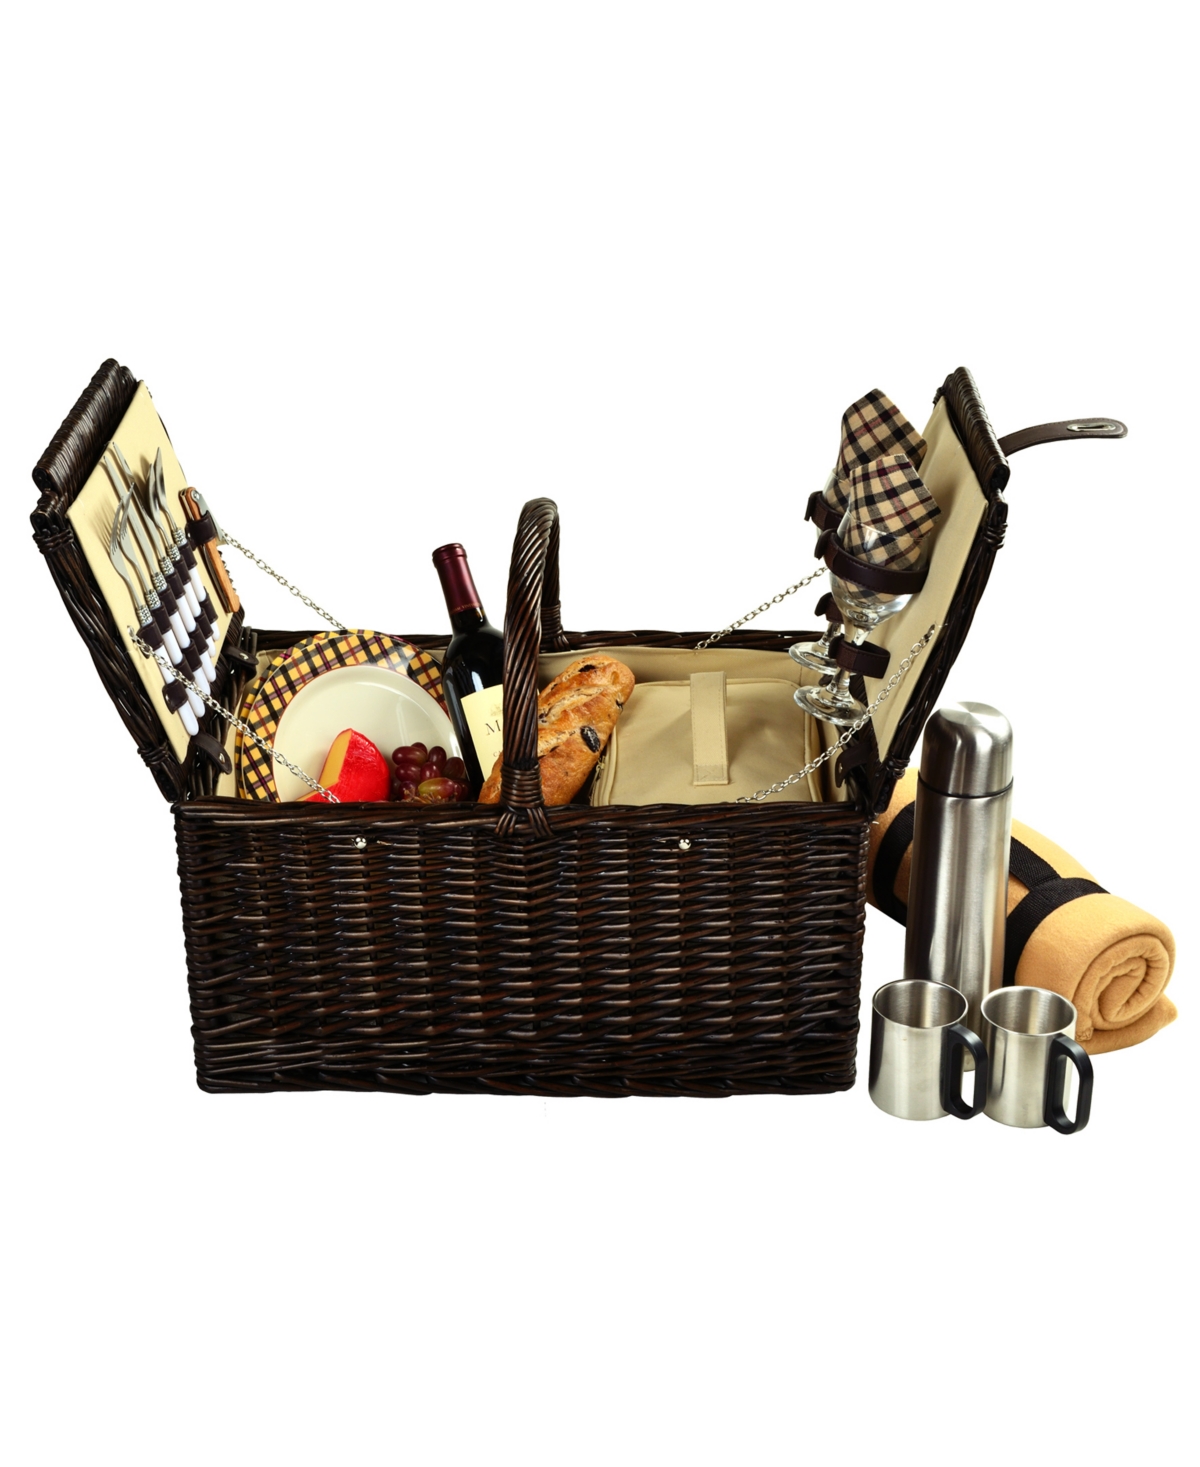 Surrey Willow Picnic Basket for 2 with Blanket and Coffee Set - Orange